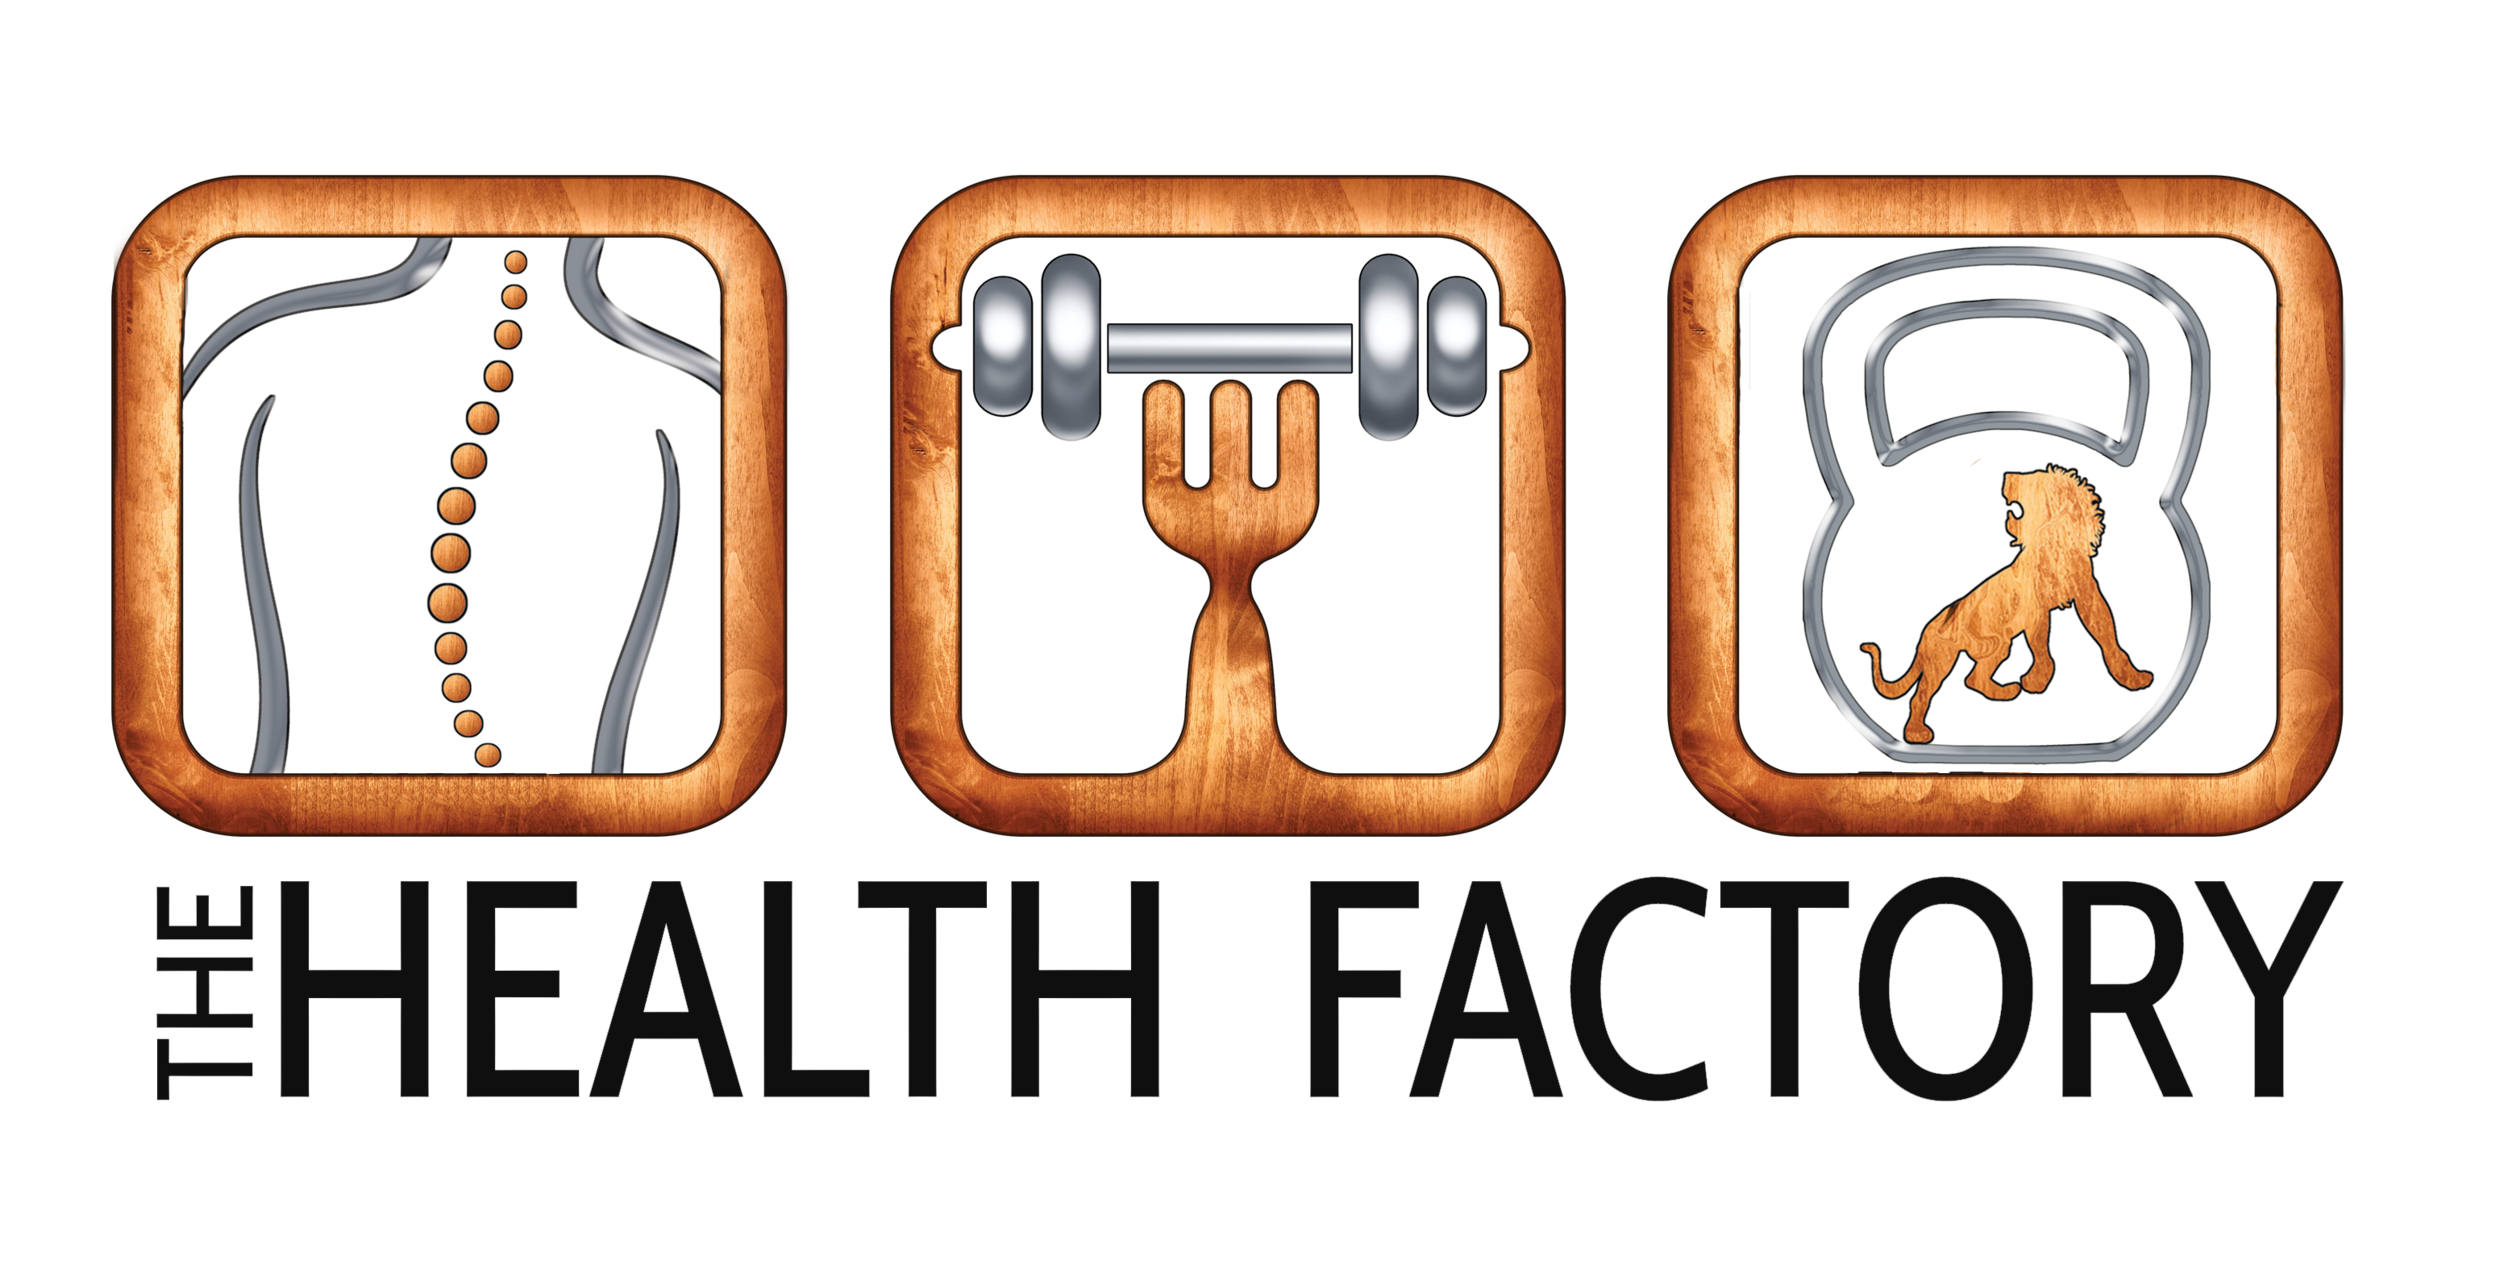 The Health Factory